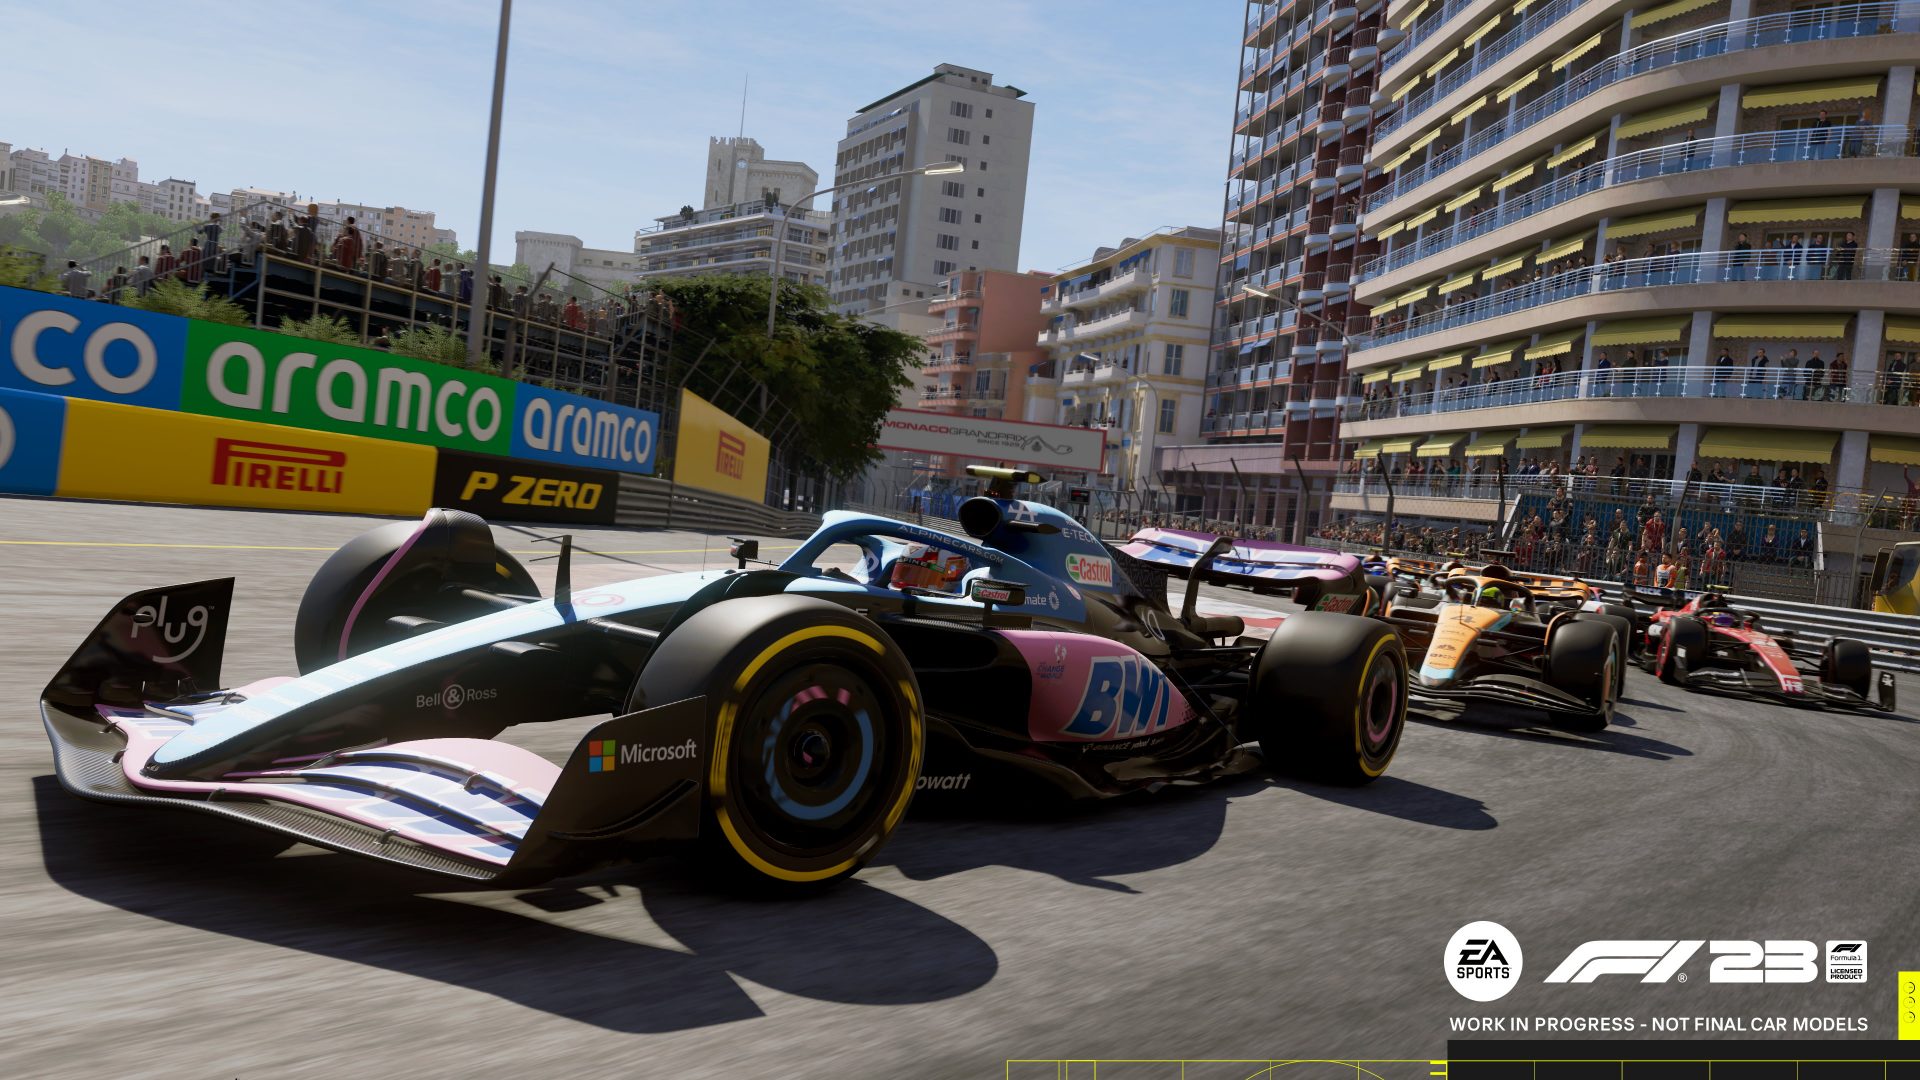 | return VGC trailer Point mode release F1 and 23 June Braking story confirms date of